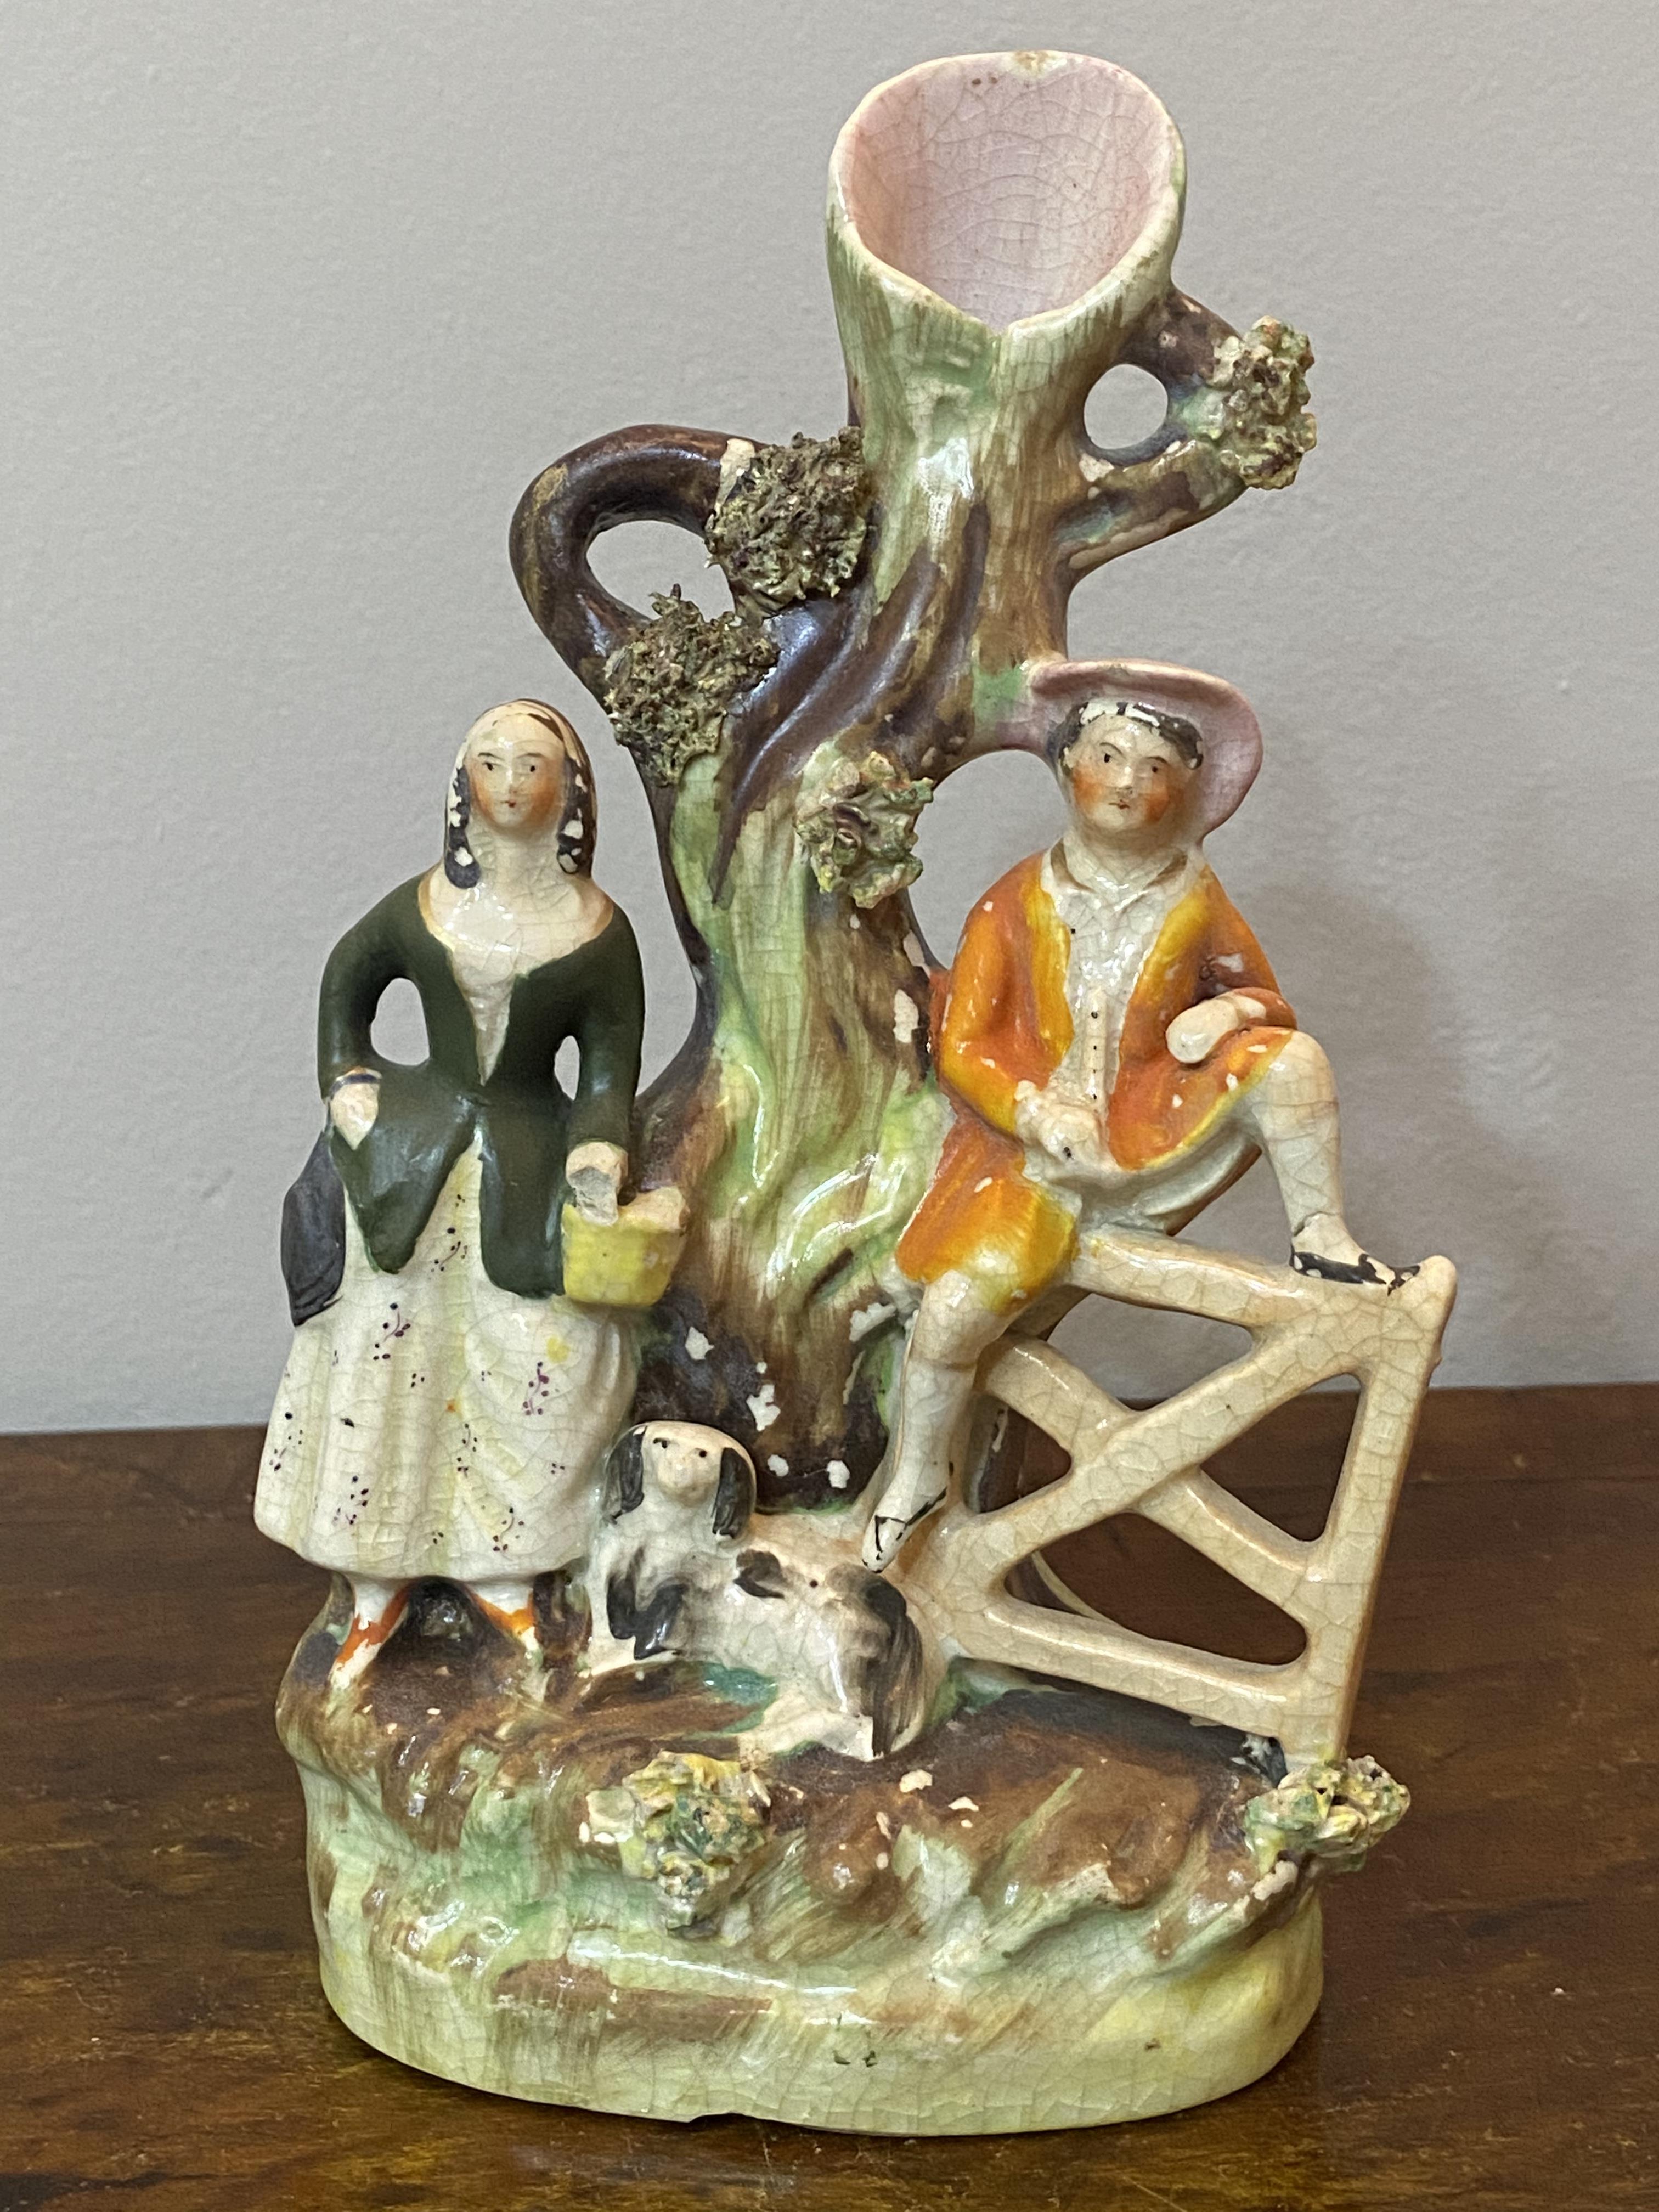 C19th small Staffordshire figurative group of a couple - Image 8 of 8